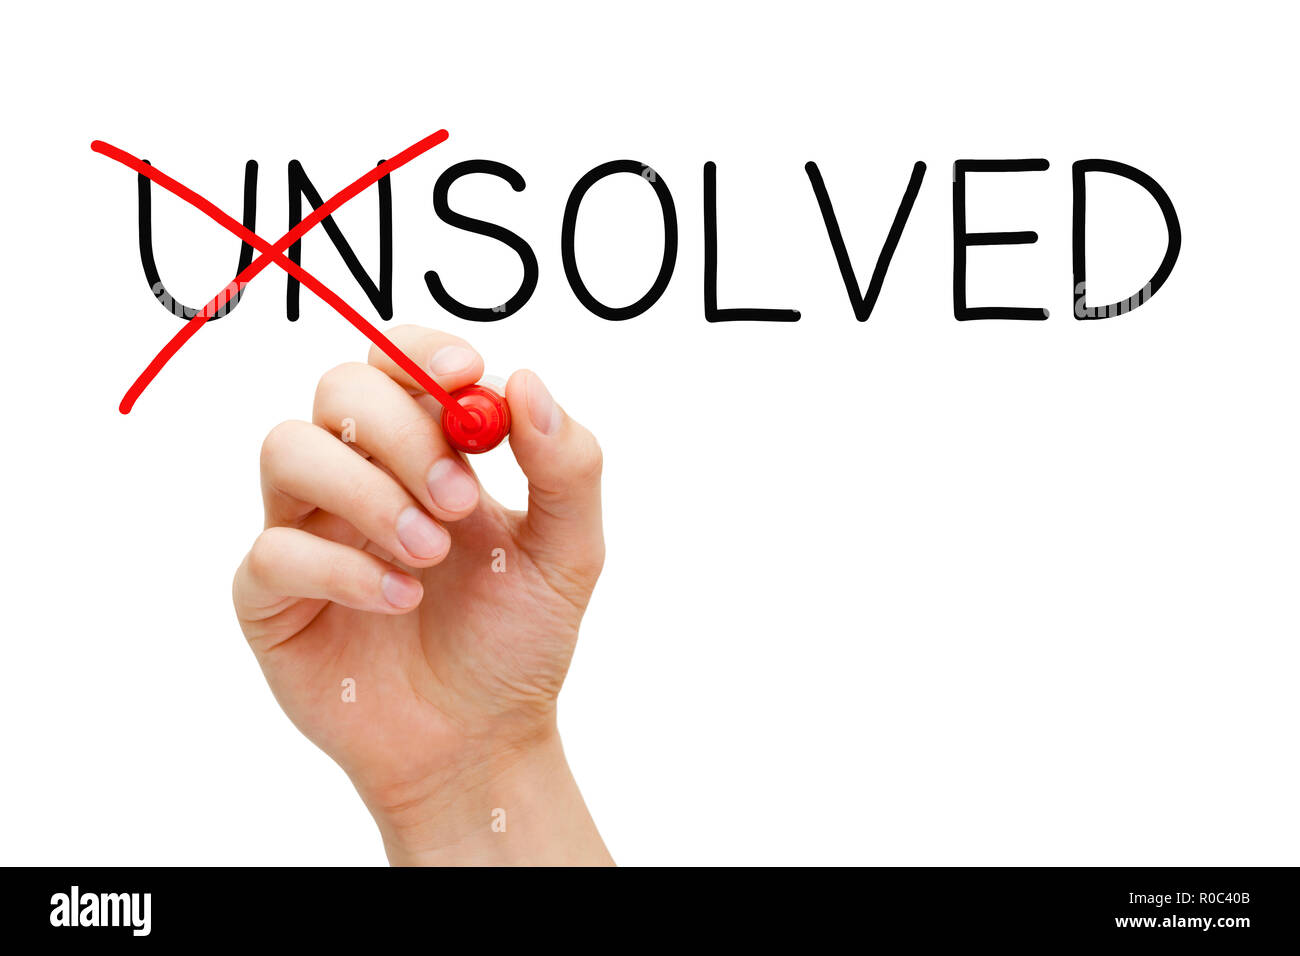 Hand changing the word Unsolved into Solved with red marker isolated on white in solution concept. Stock Photo